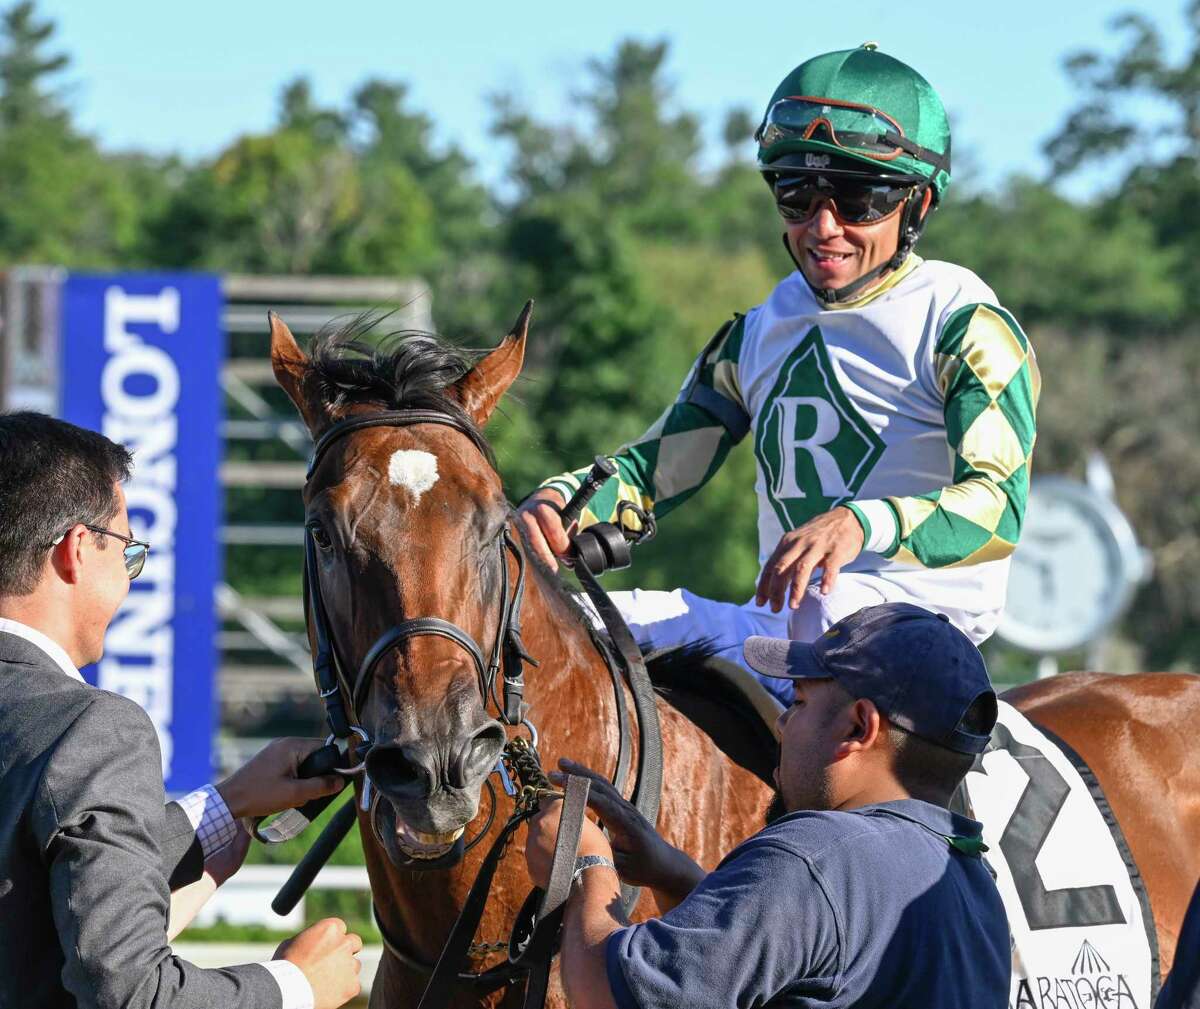 Jockey Joel Rosario is all smiles on Big Invasion after winning the 4th running of The Mahony at the Saratoga Race Course Sunday Aug. 14, 2022 in Saratoga Springs N.Y. Photo Special to the Times Union by Skip Dickstein